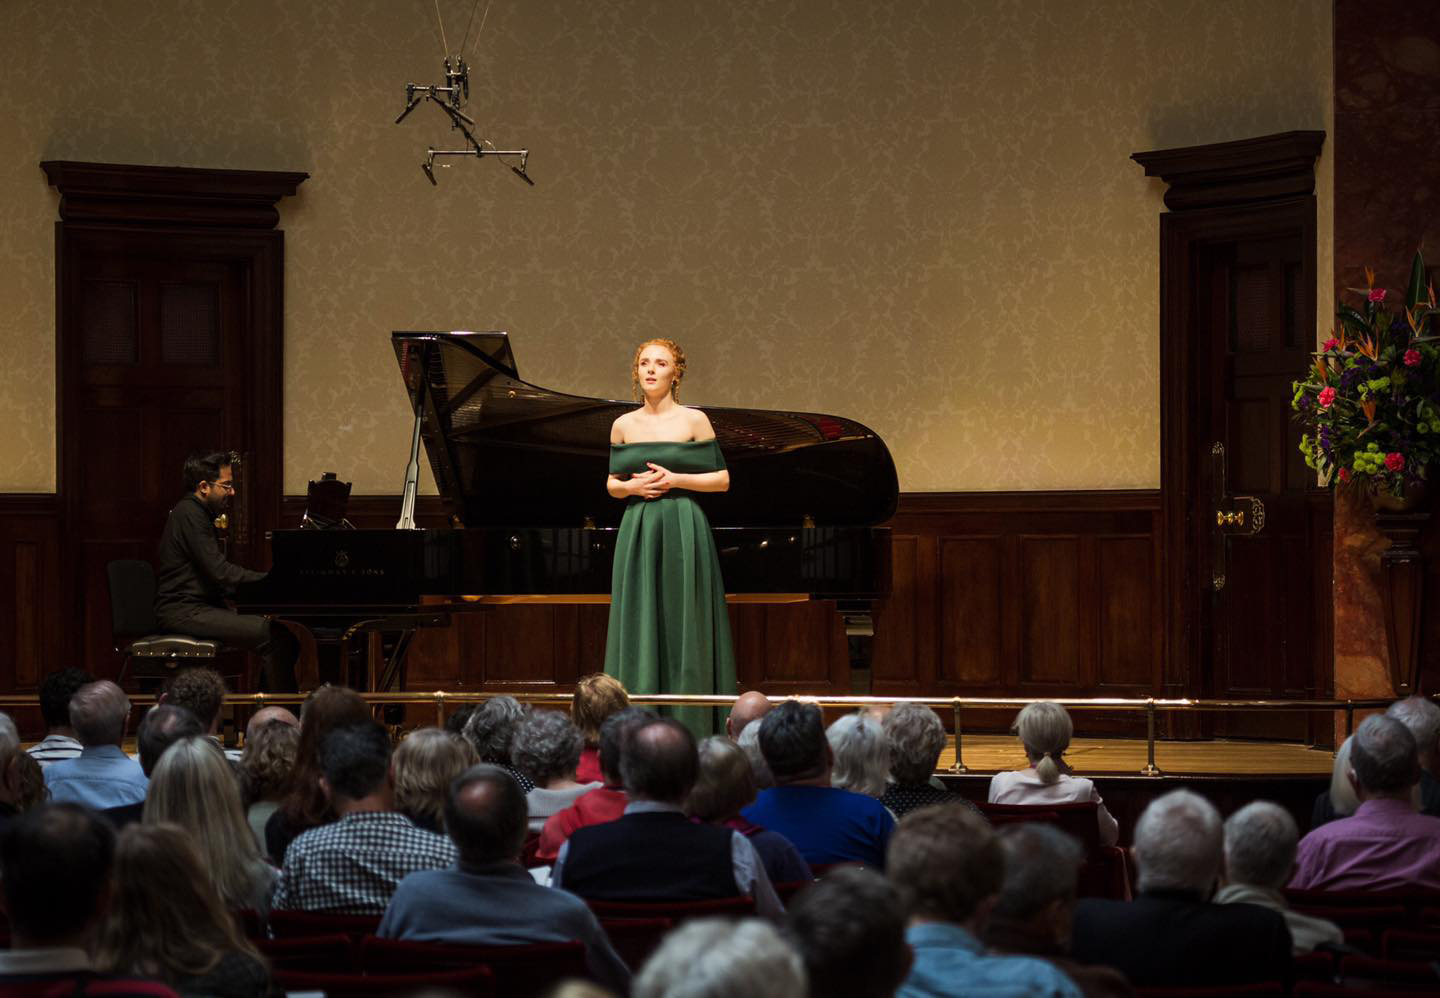 Esme Bronwen-Smith singing on stage to an audience in the foreground, and an accompanist is playing the piano behind her